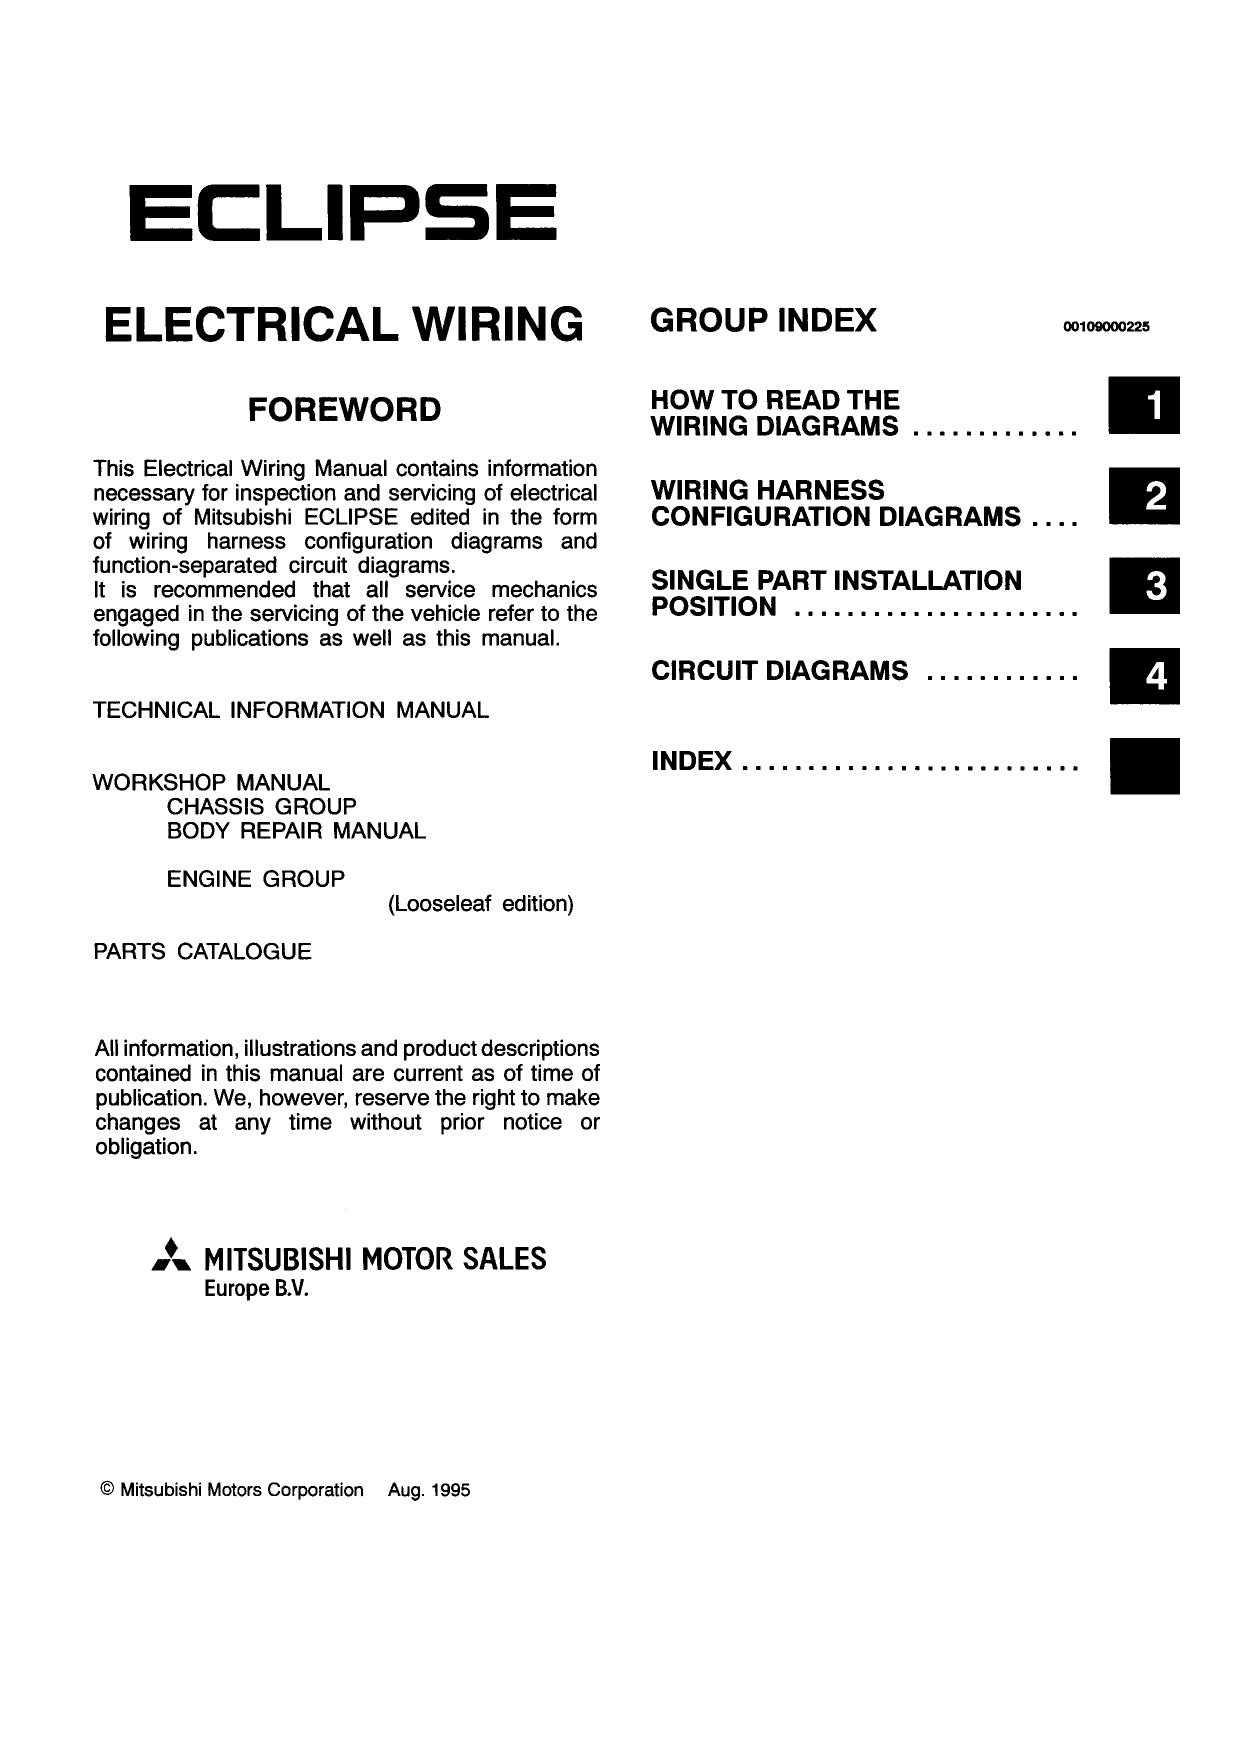 PHUE95E1 ECLIPSE 96 ELECTRICAL WIRING by Anna